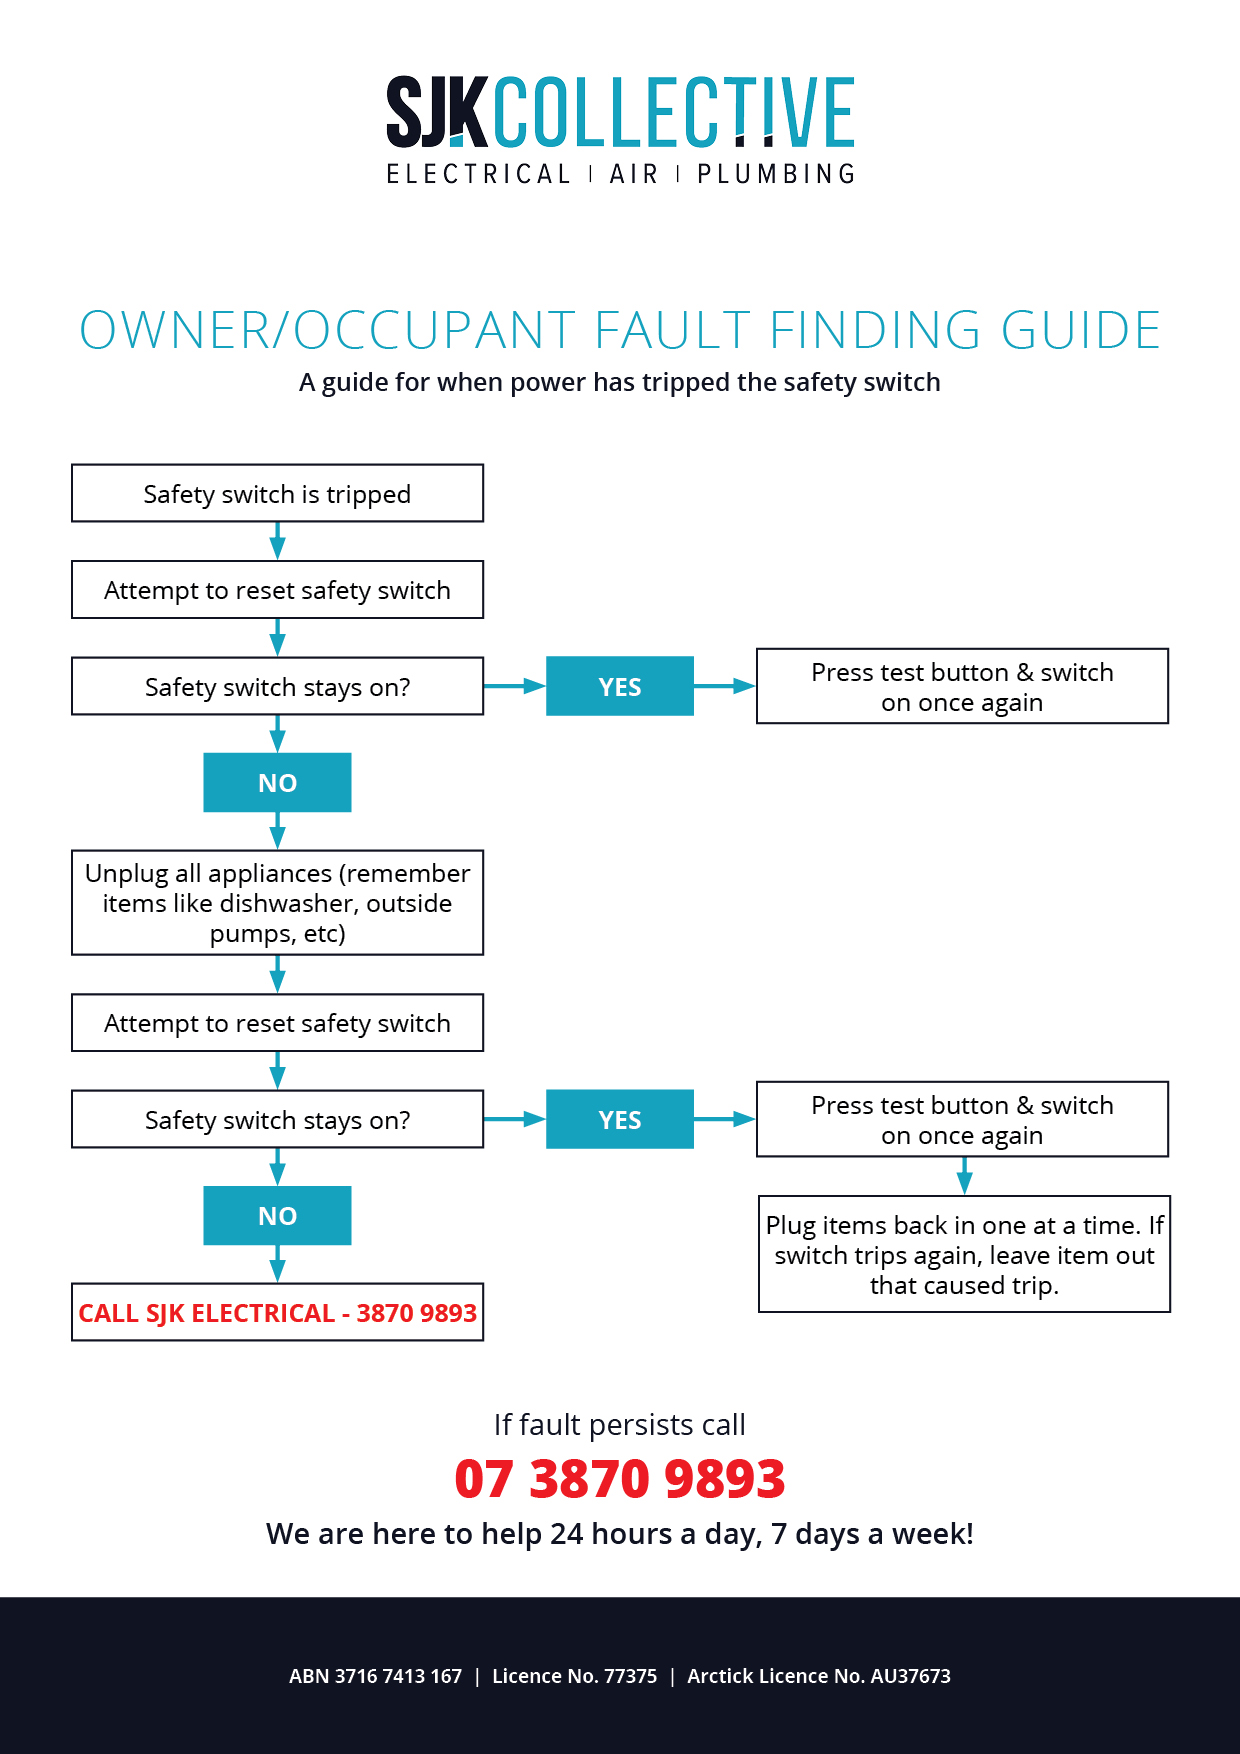 SJK Collective Fault Finding Guide